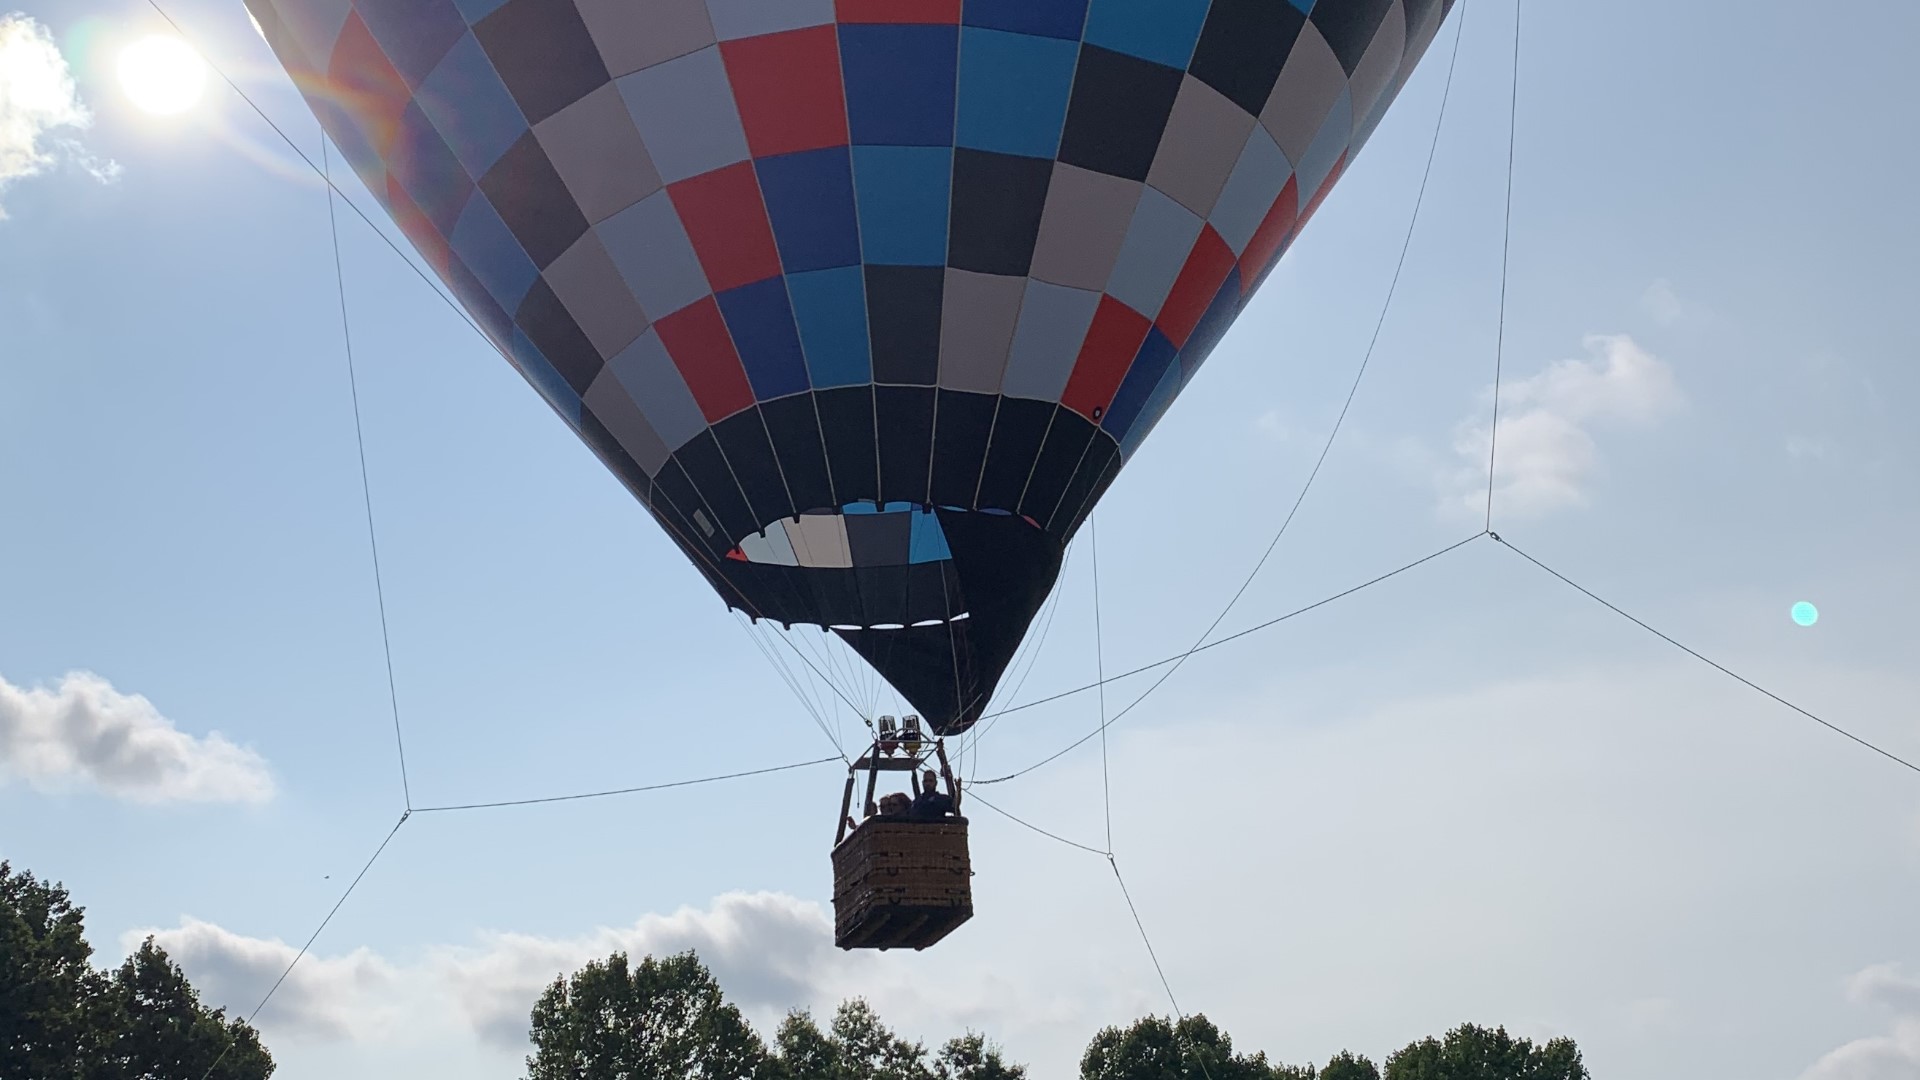 People from both sides of the Mason-Dixon Line came to the festival to take flight in hot air balloons.